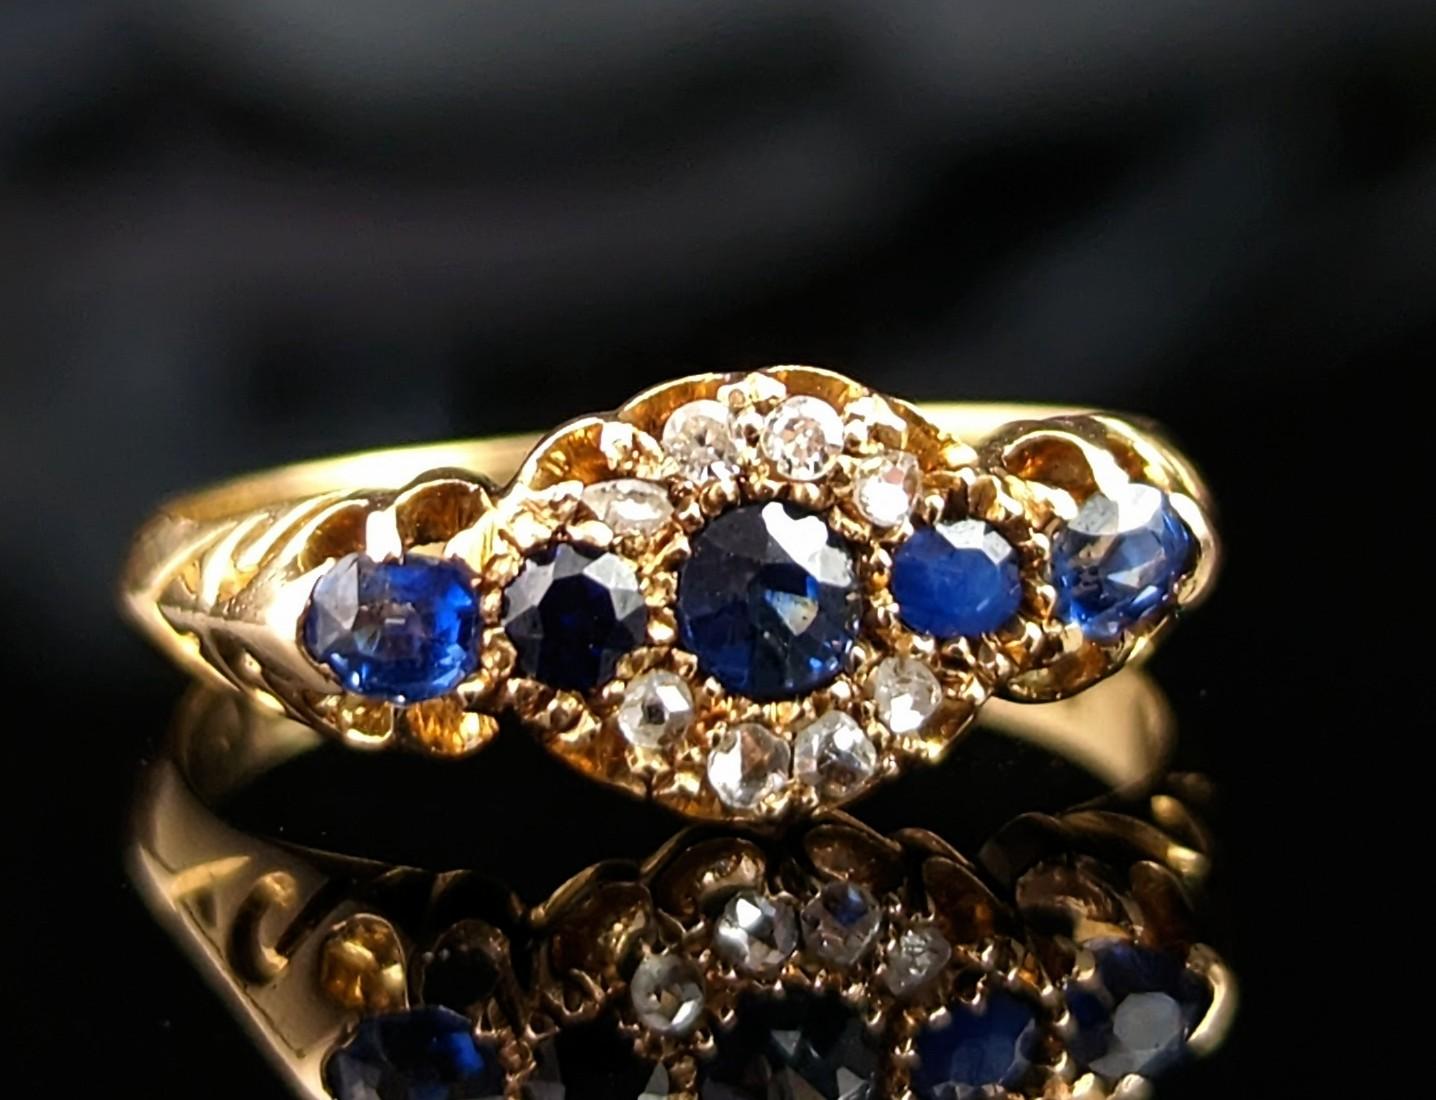 This stunning antique, Edwardian era, Sapphire and Diamond cluster ring is a simply a dream.

Crafted in rich 18kt yellow gold this ring has a central floral shaped cluster with a vibrant blue round cut sapphire to the centre surrounded by a halo of